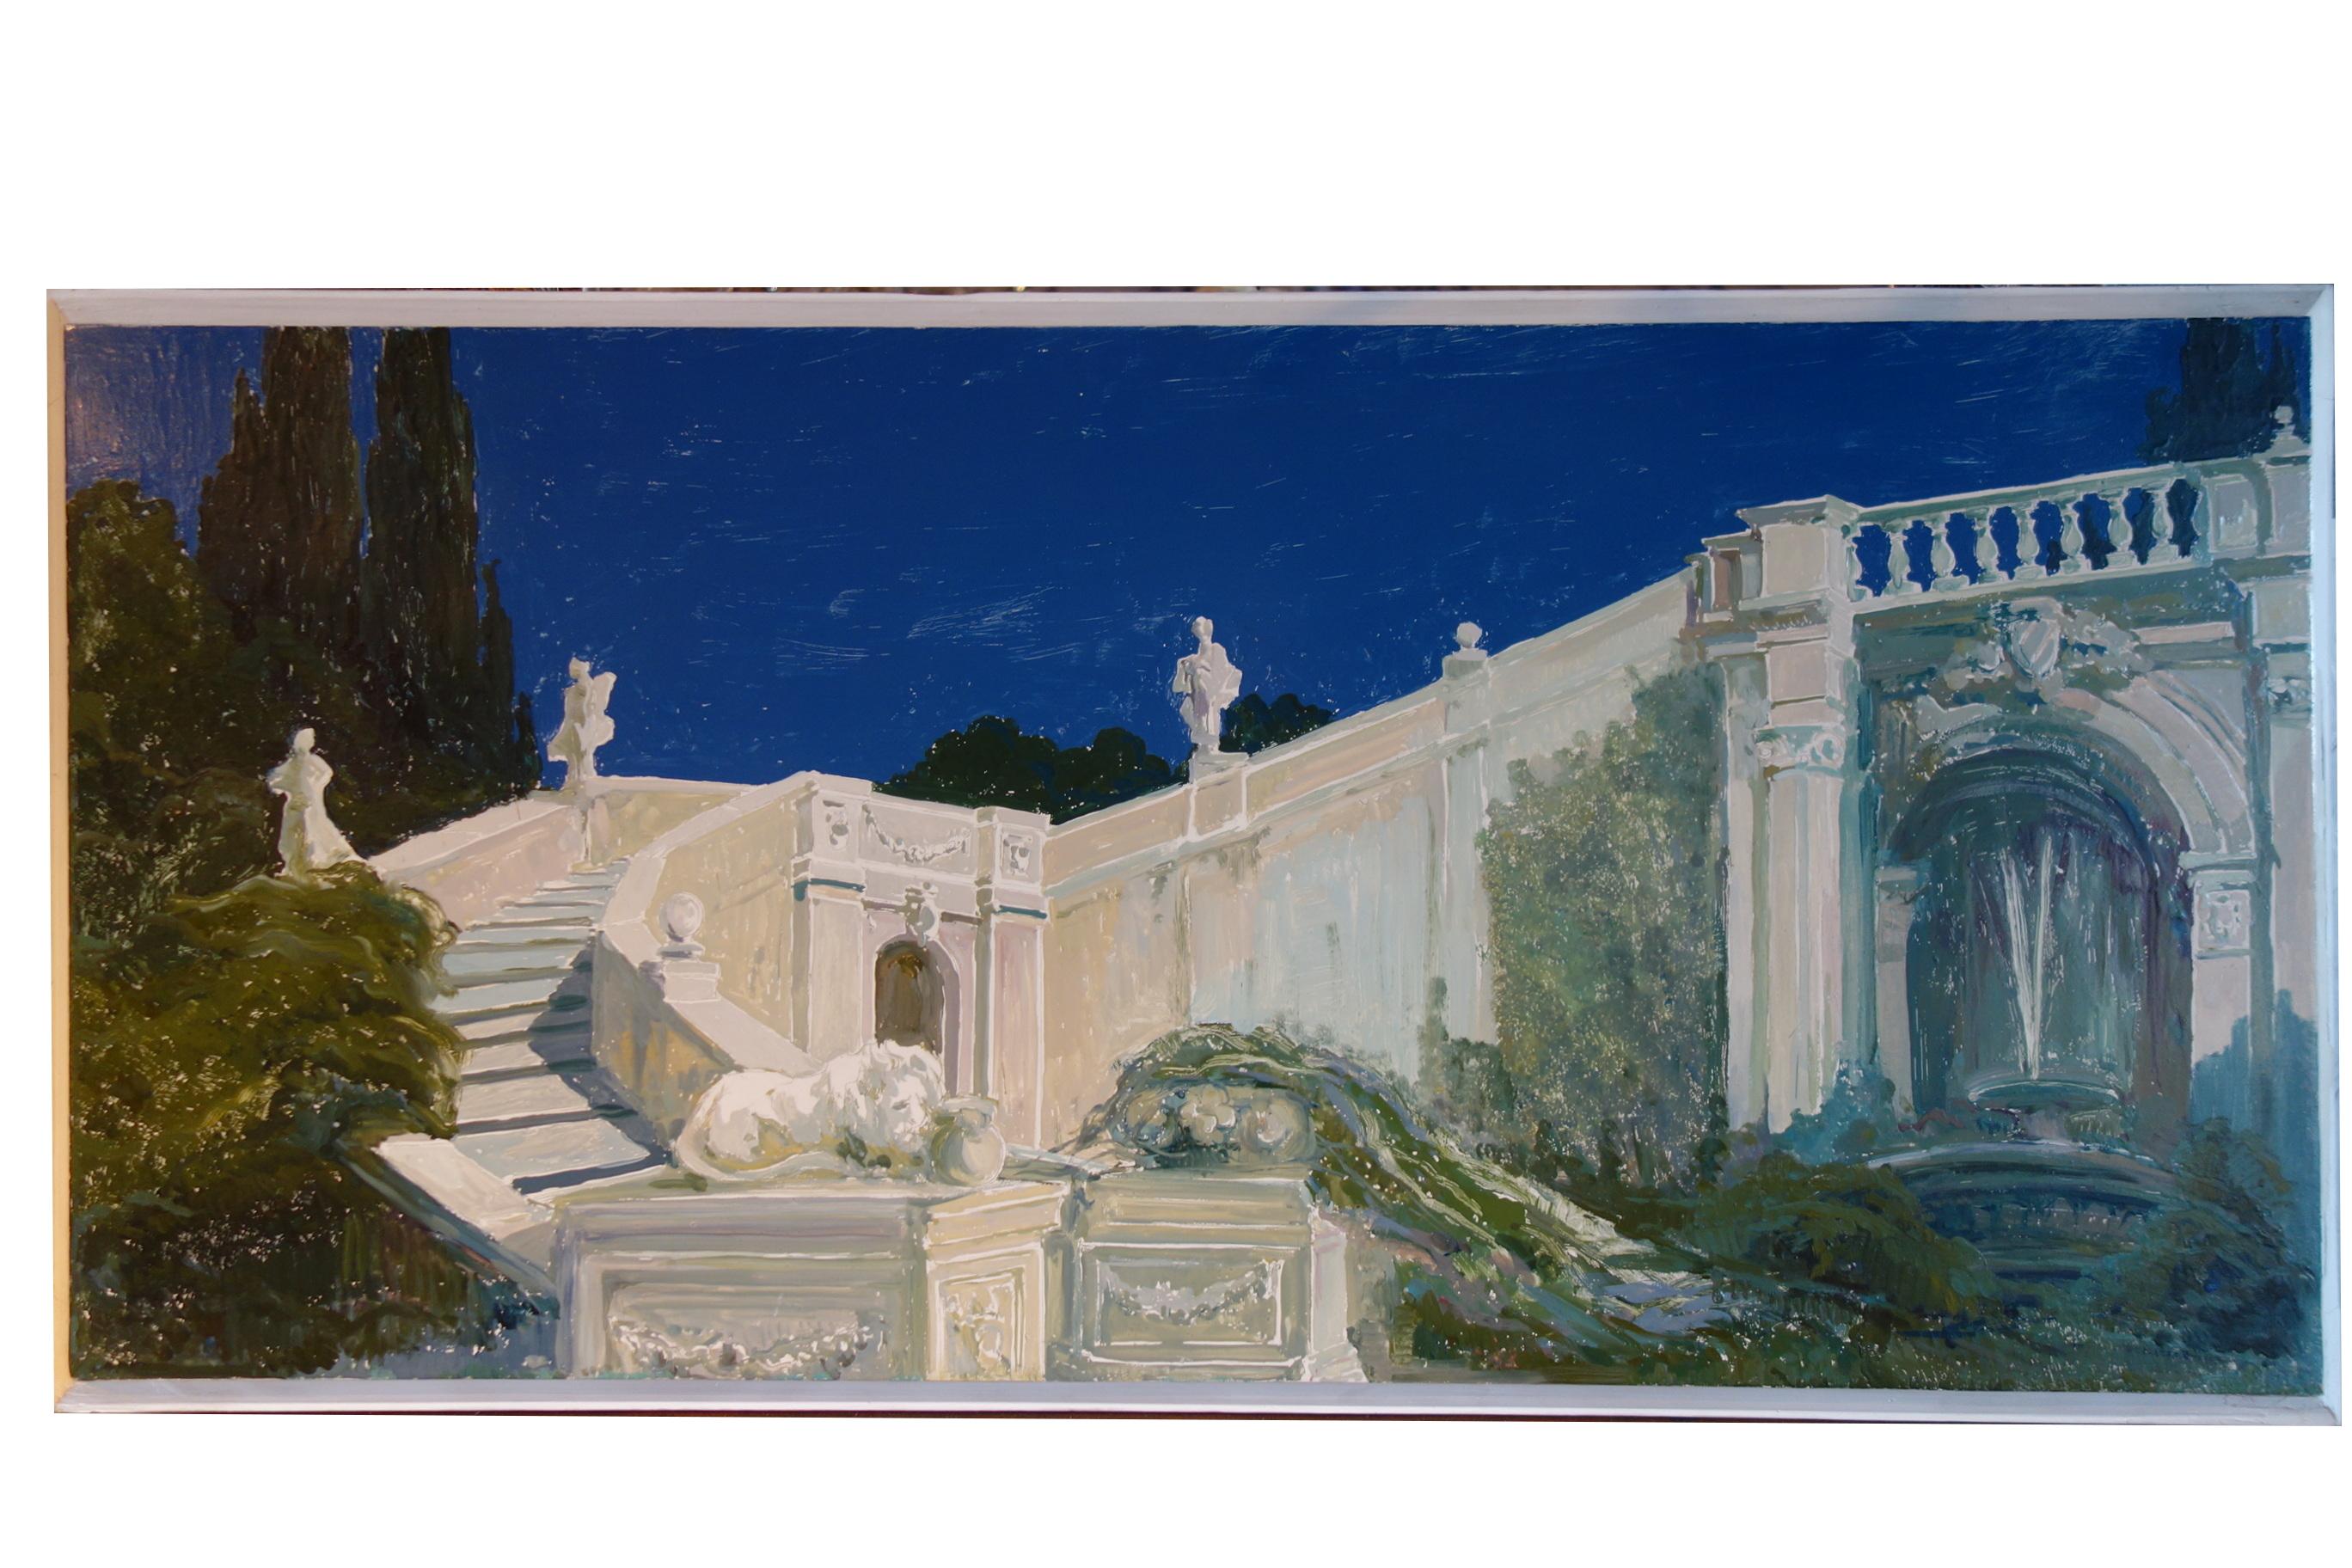 Vintage set of six paintings on boards, study for an Italian Classic garden. 
Probably a scenographic preparation. Pleasant Mediterranean architectural scenery. Vivid color in blue, green and white, circa 1960. Brings to mind the Hearst castle pool